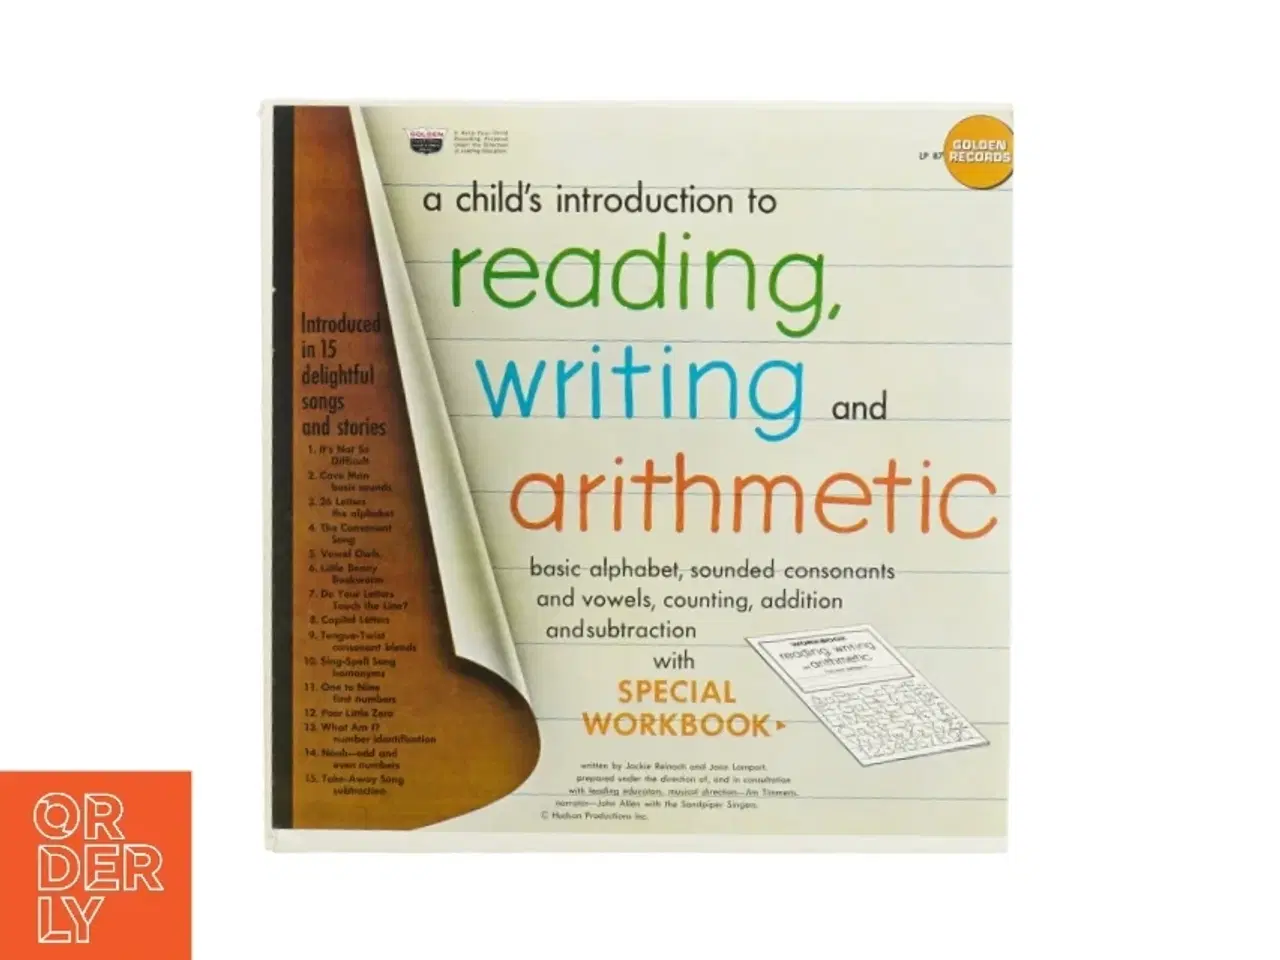 Billede 1 - A childs introduction to reading, writing and arithmetic vinylplade